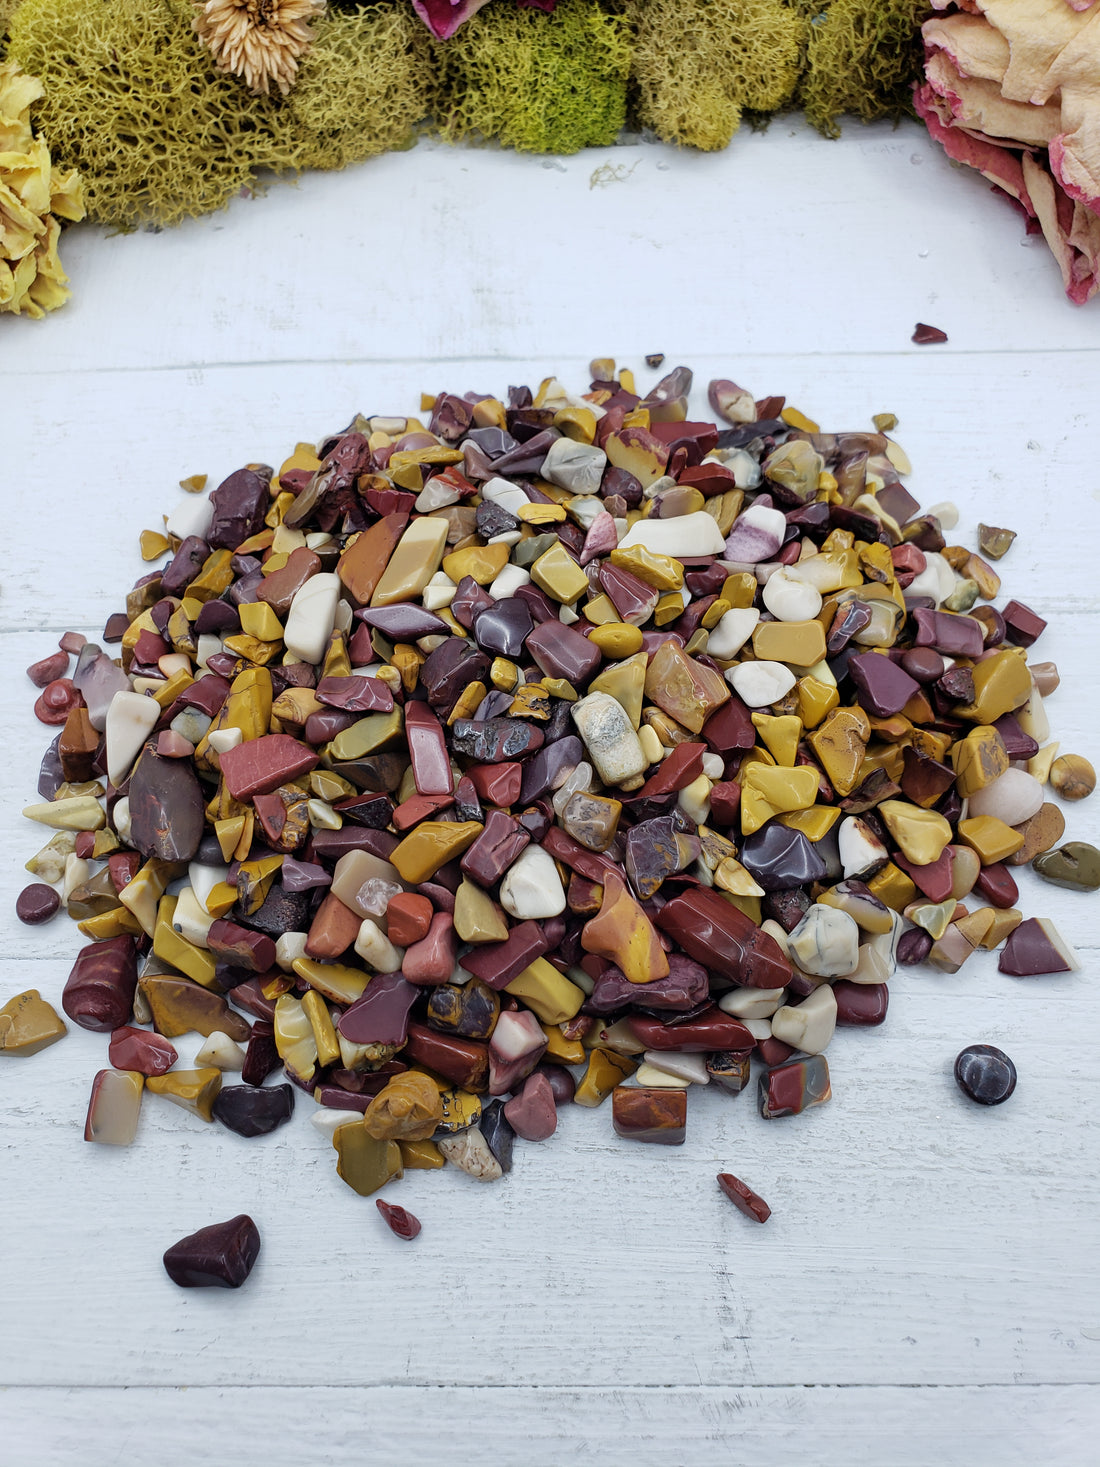 Eight ounces of mookaite chips on display